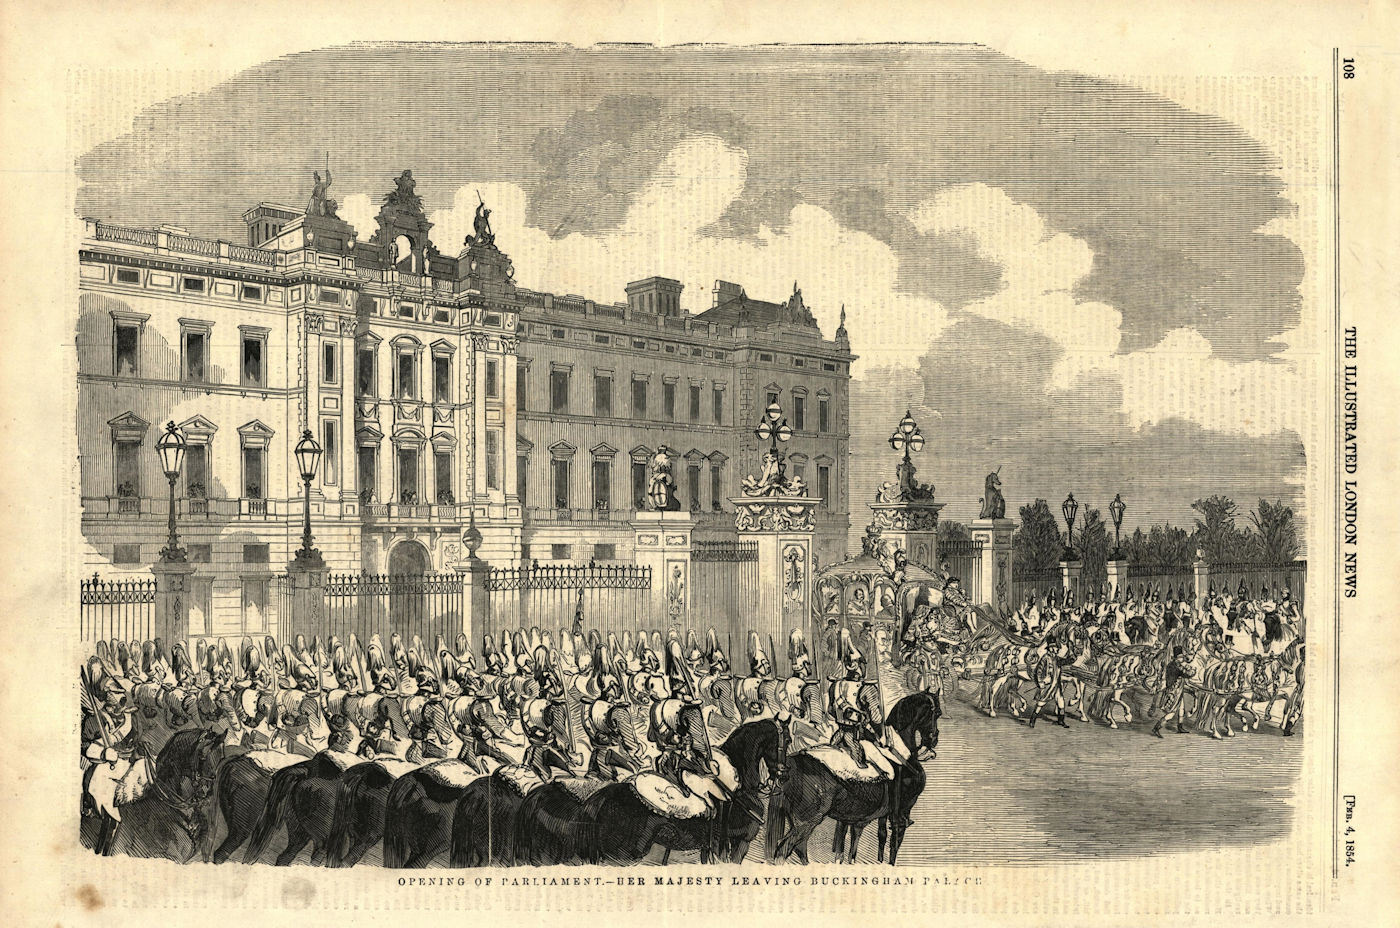 Opening of Parliament - Her Majesty leaving Buckingham Palace. London 1854